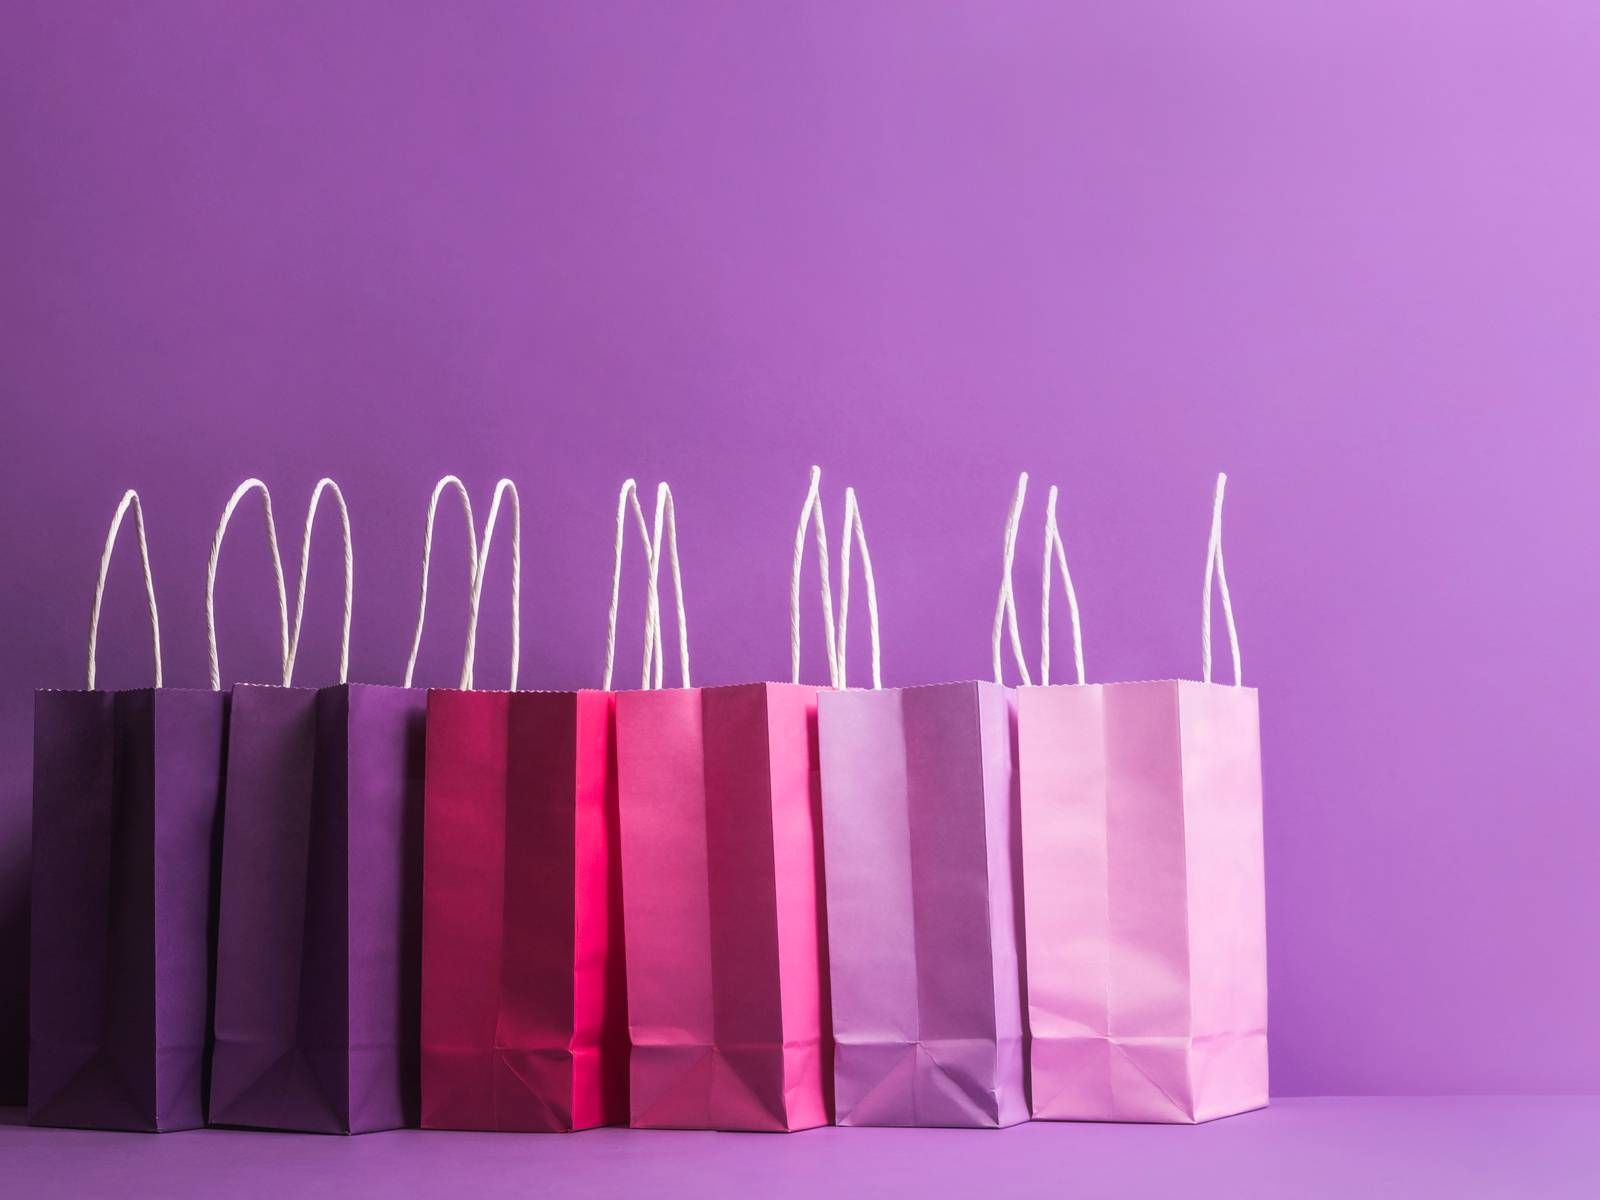 Excessive shopping has been studied for more than a century.